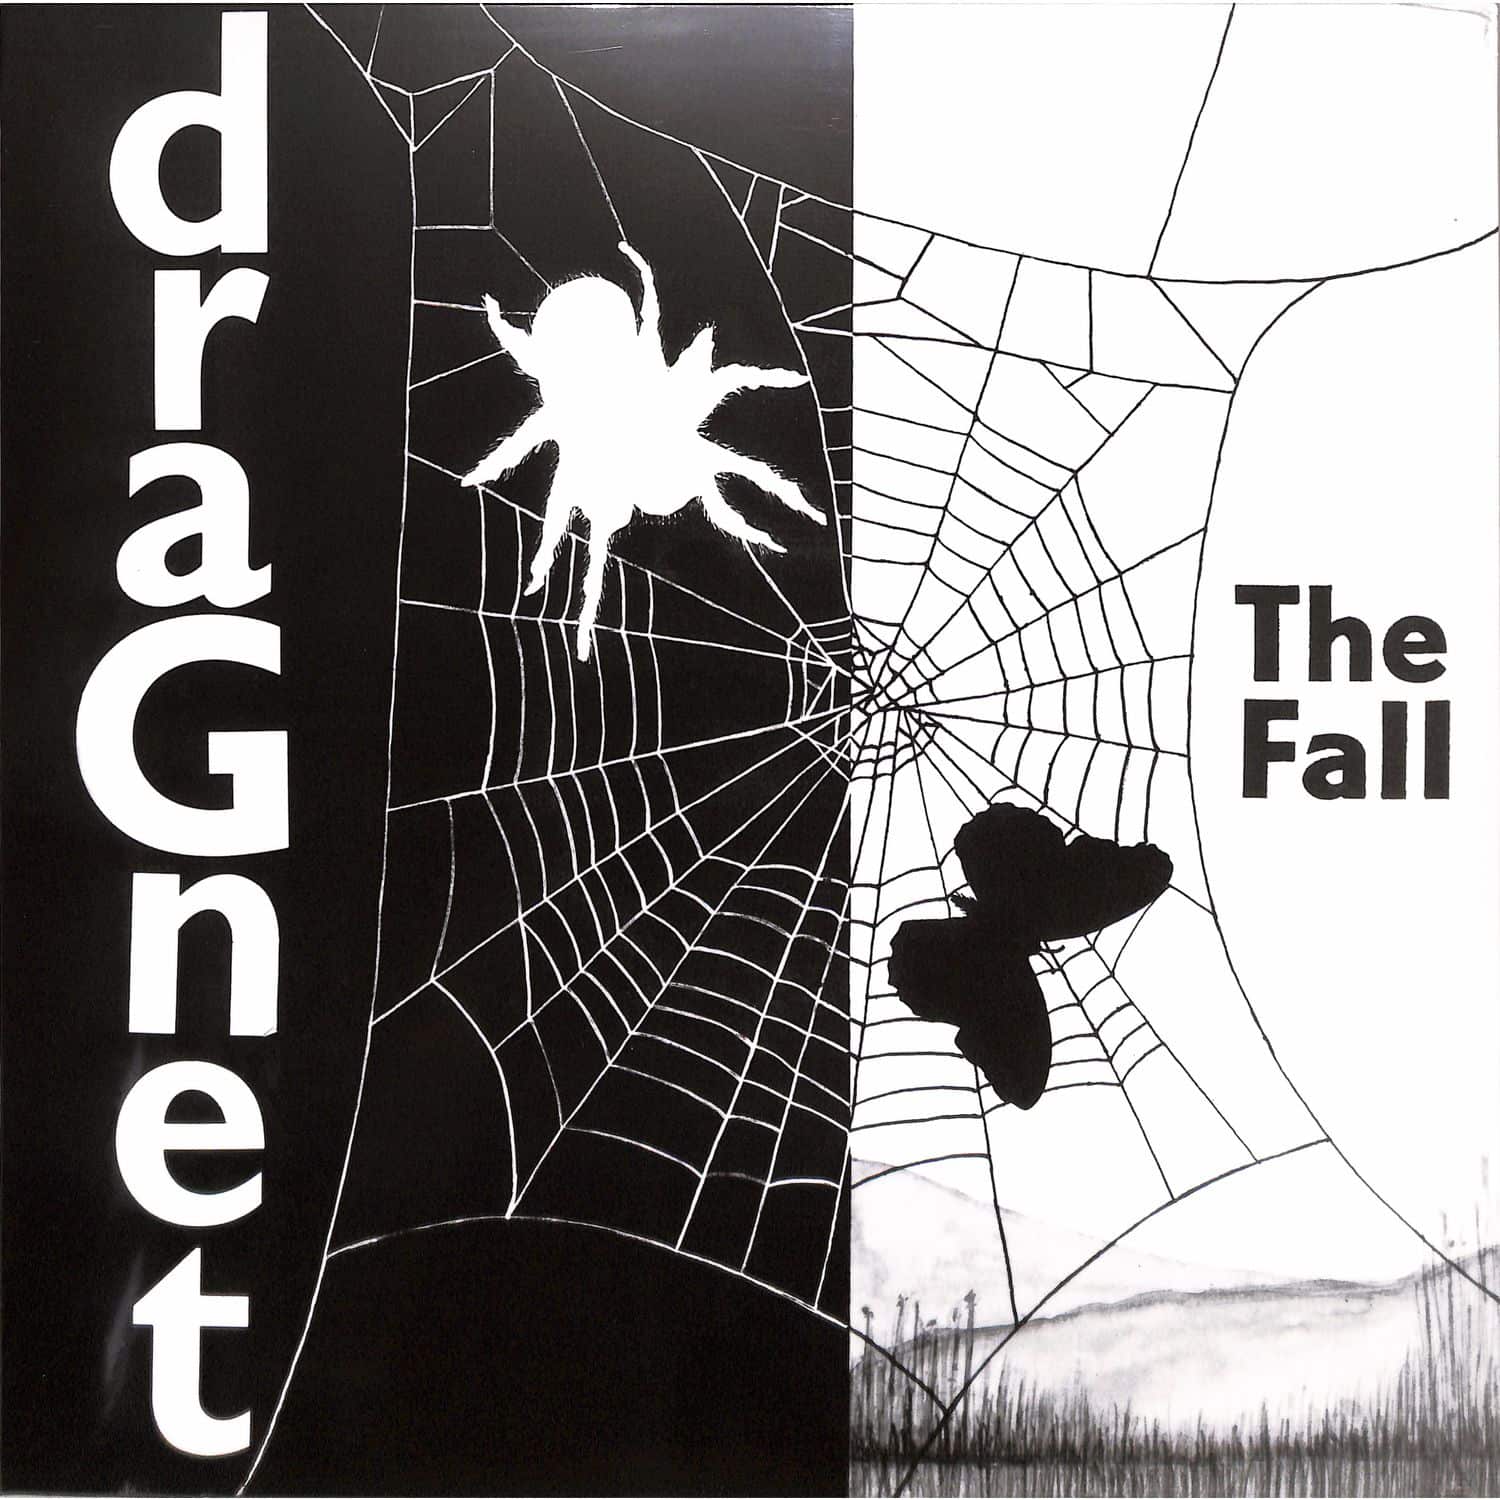  The Fall - DRAGNET 